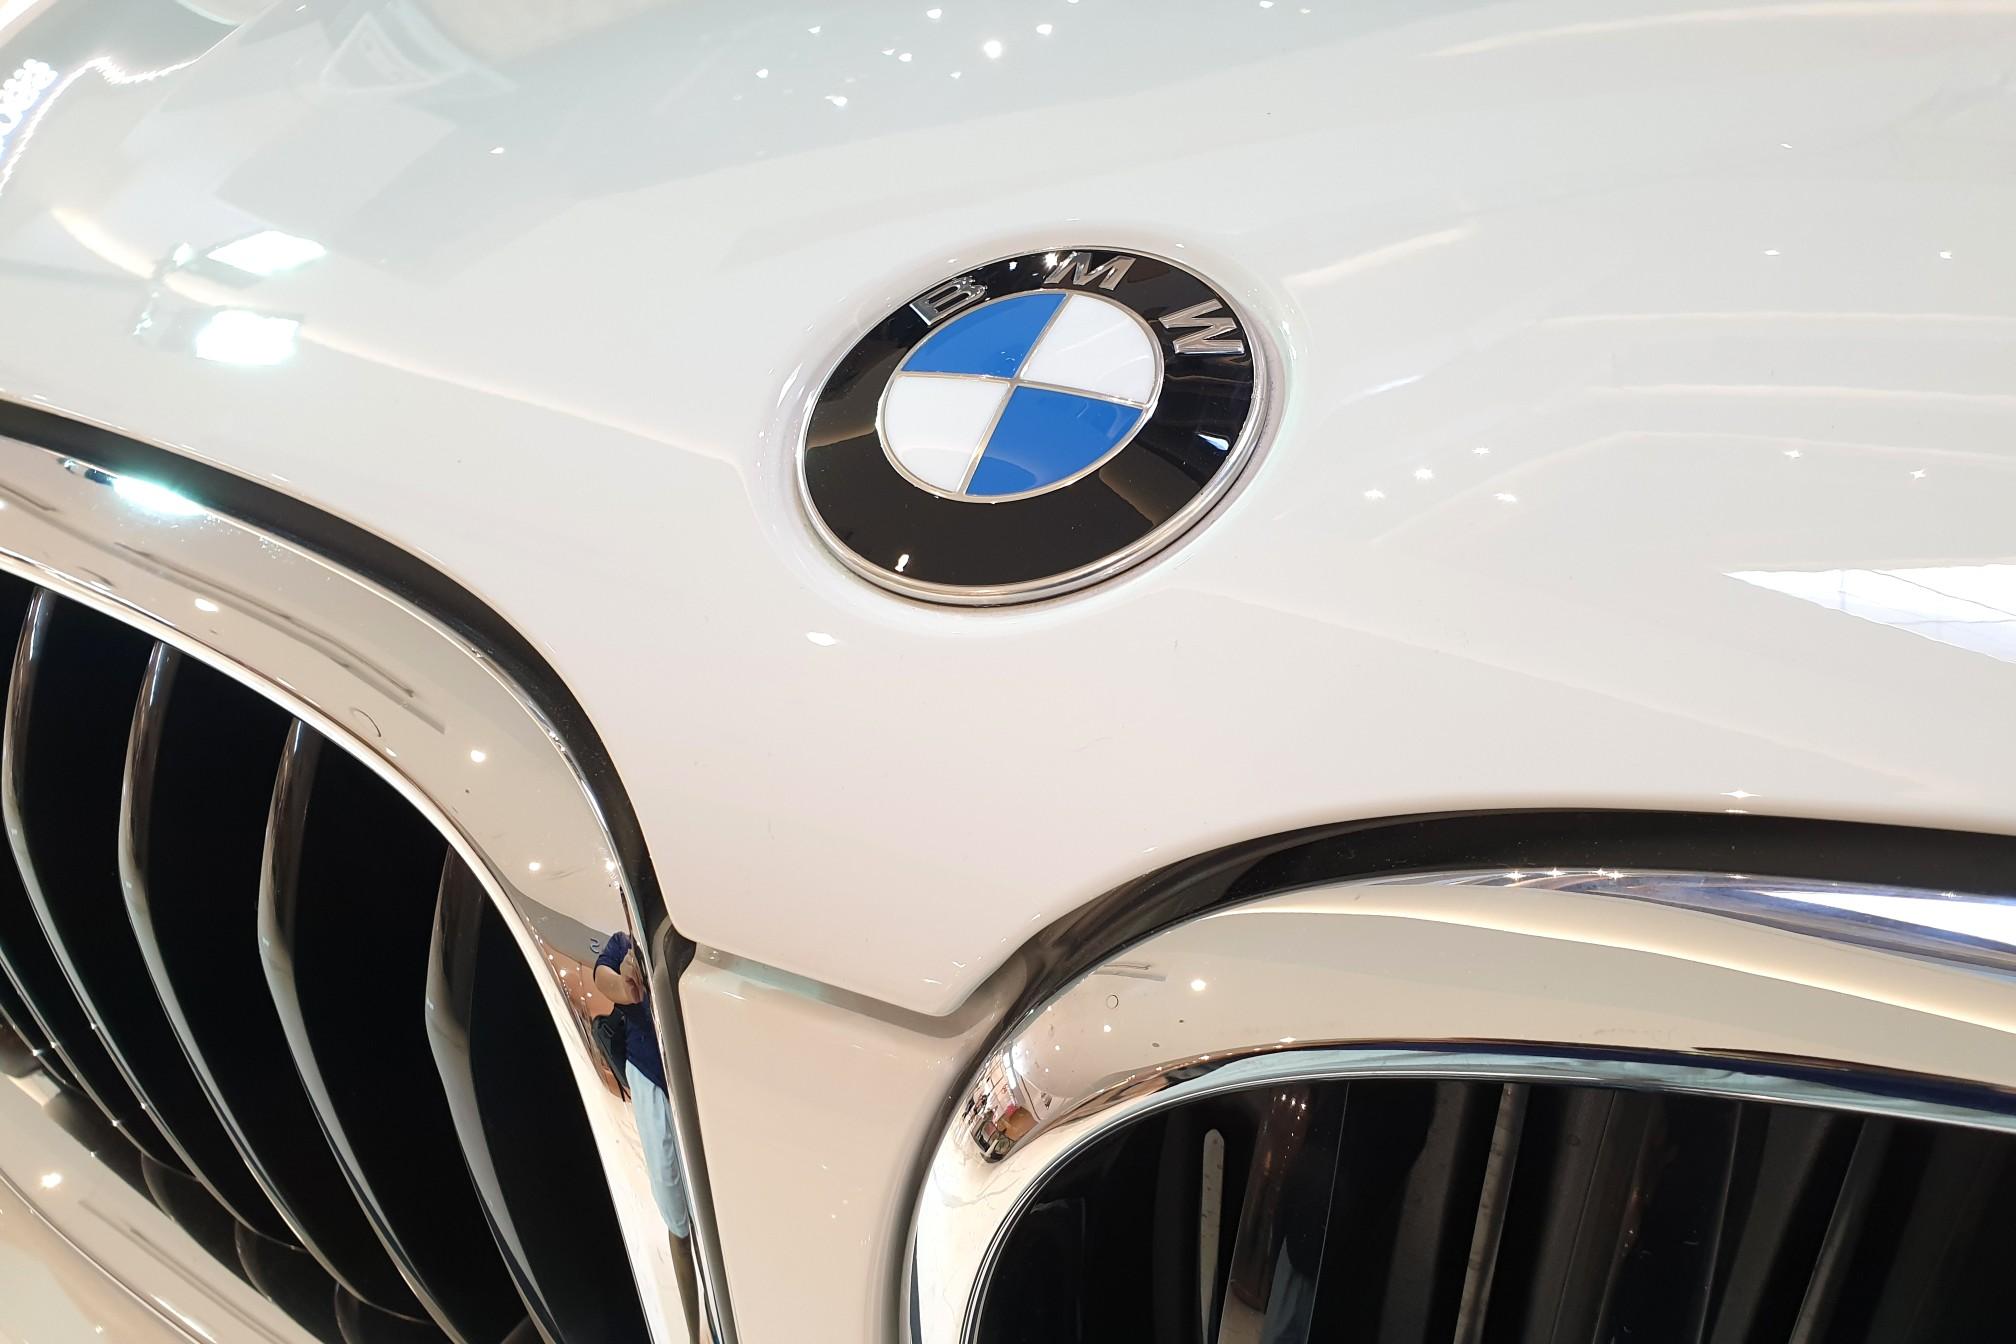 BMW, along with Volkswagen Group is being fined for colluding to slow the deployment of cleaner emissions technology.